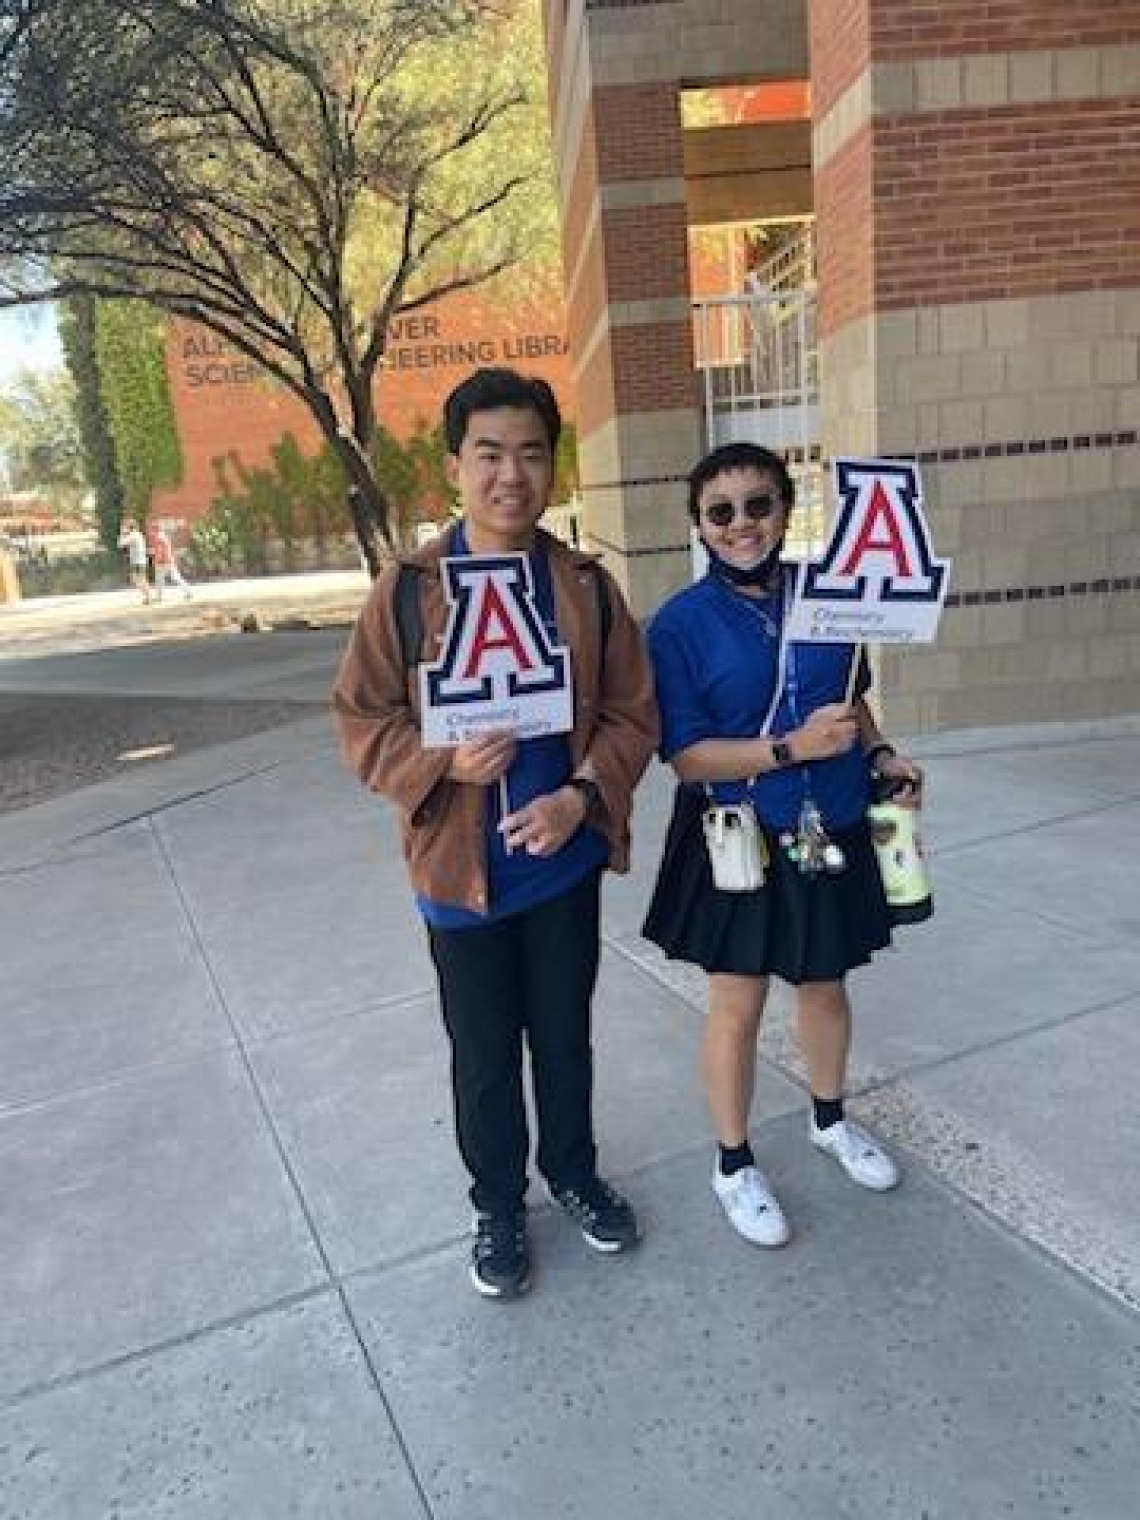 Two people hold the UArizona "A" in front of Koffler building